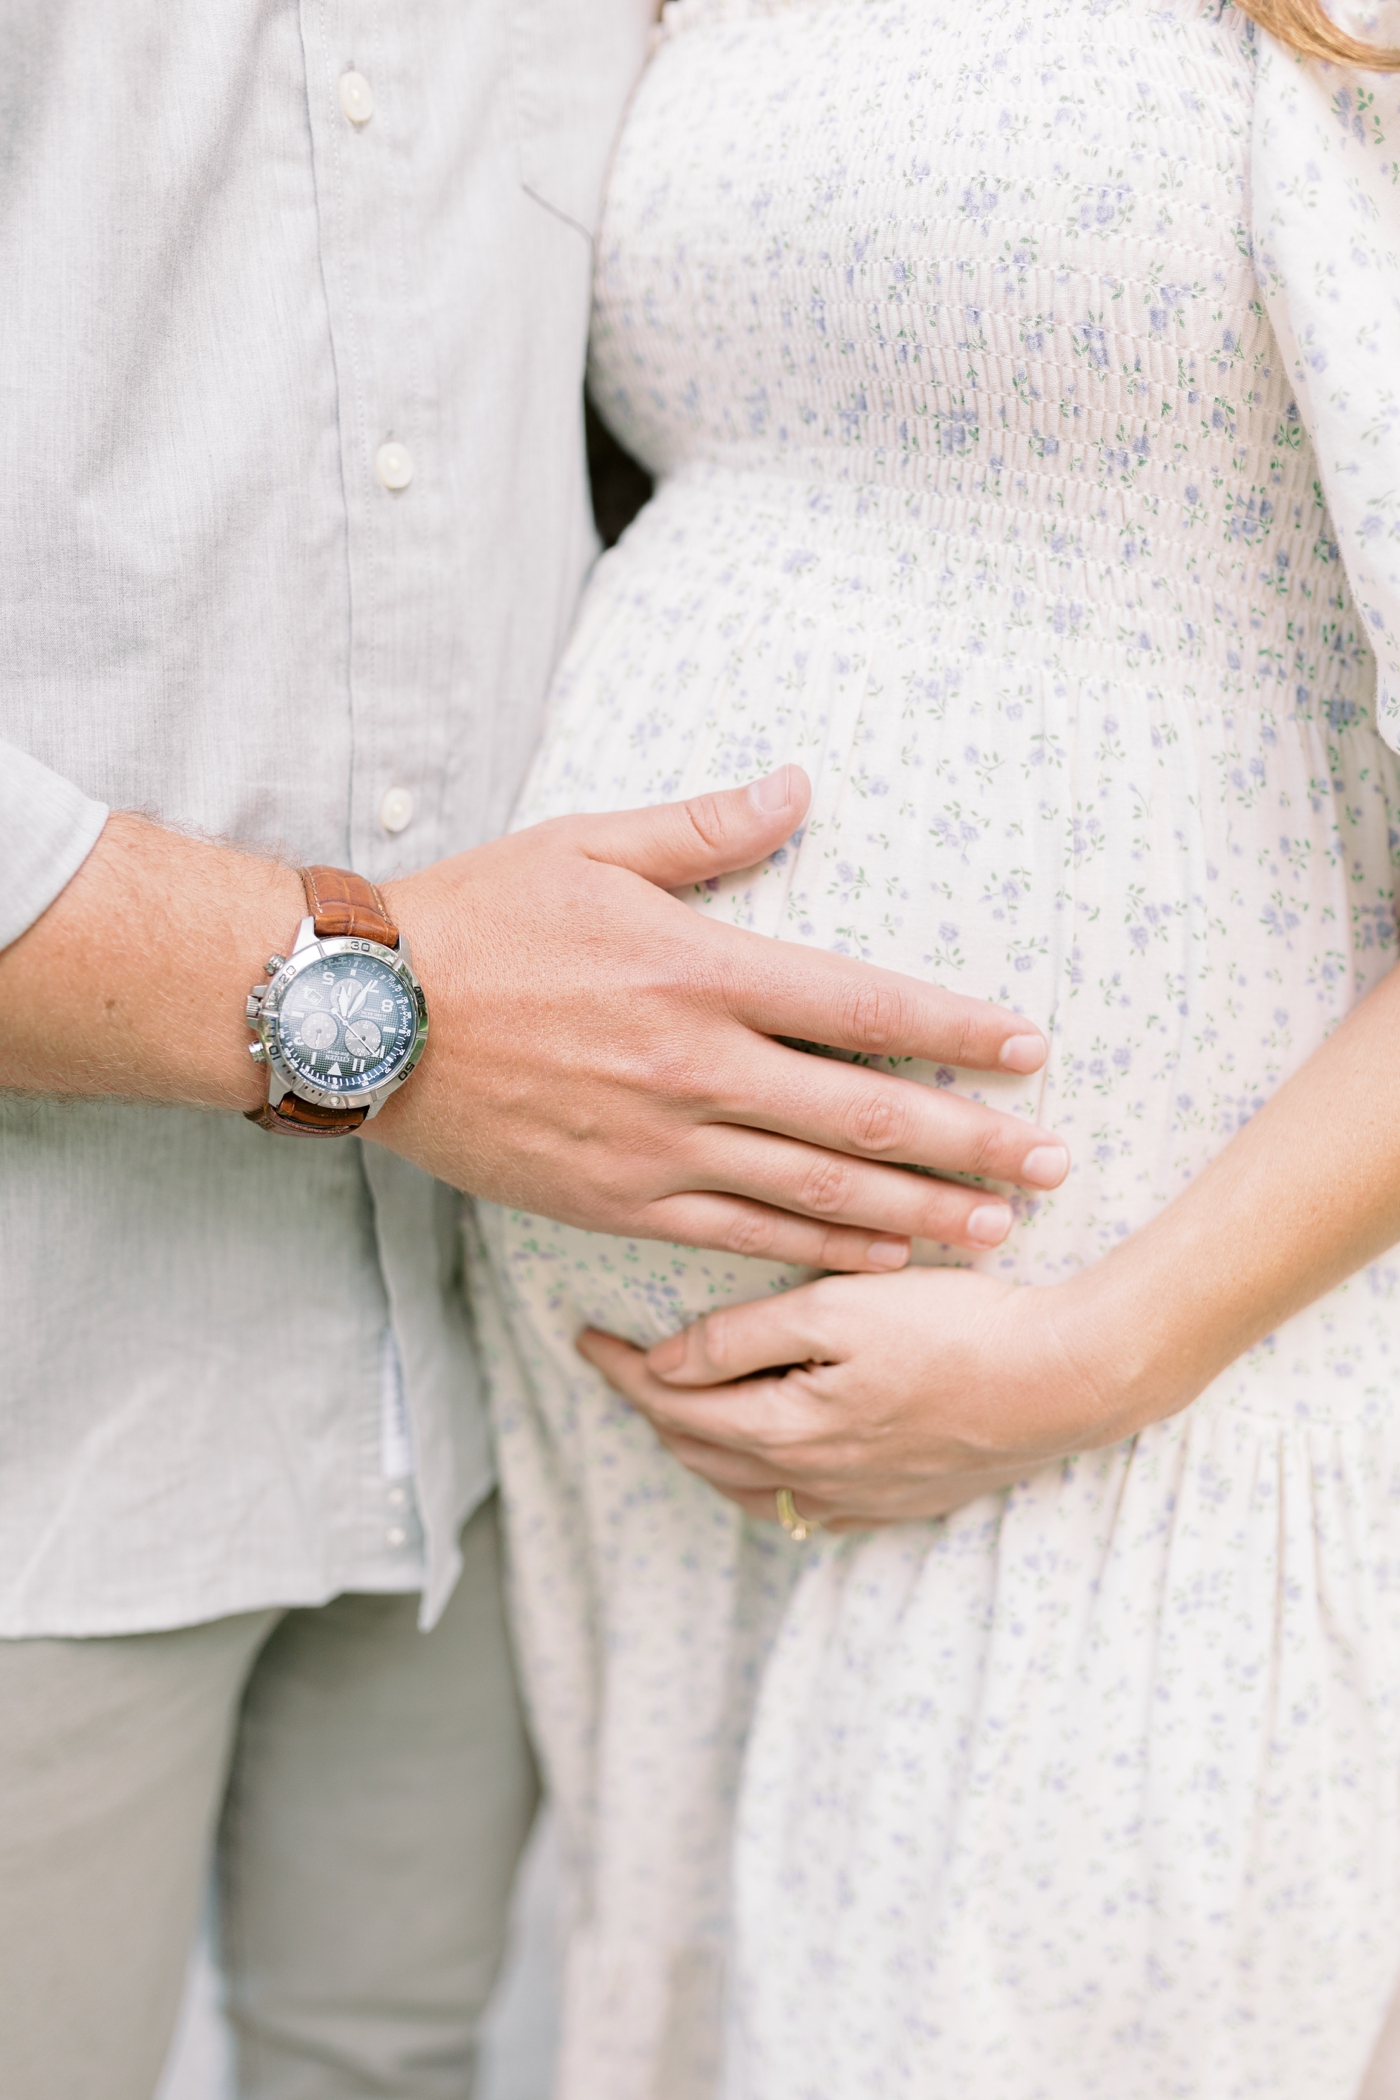 Detail of dad's hand cradling mom's belly | Photo by Caitlyn Motycka Photography.